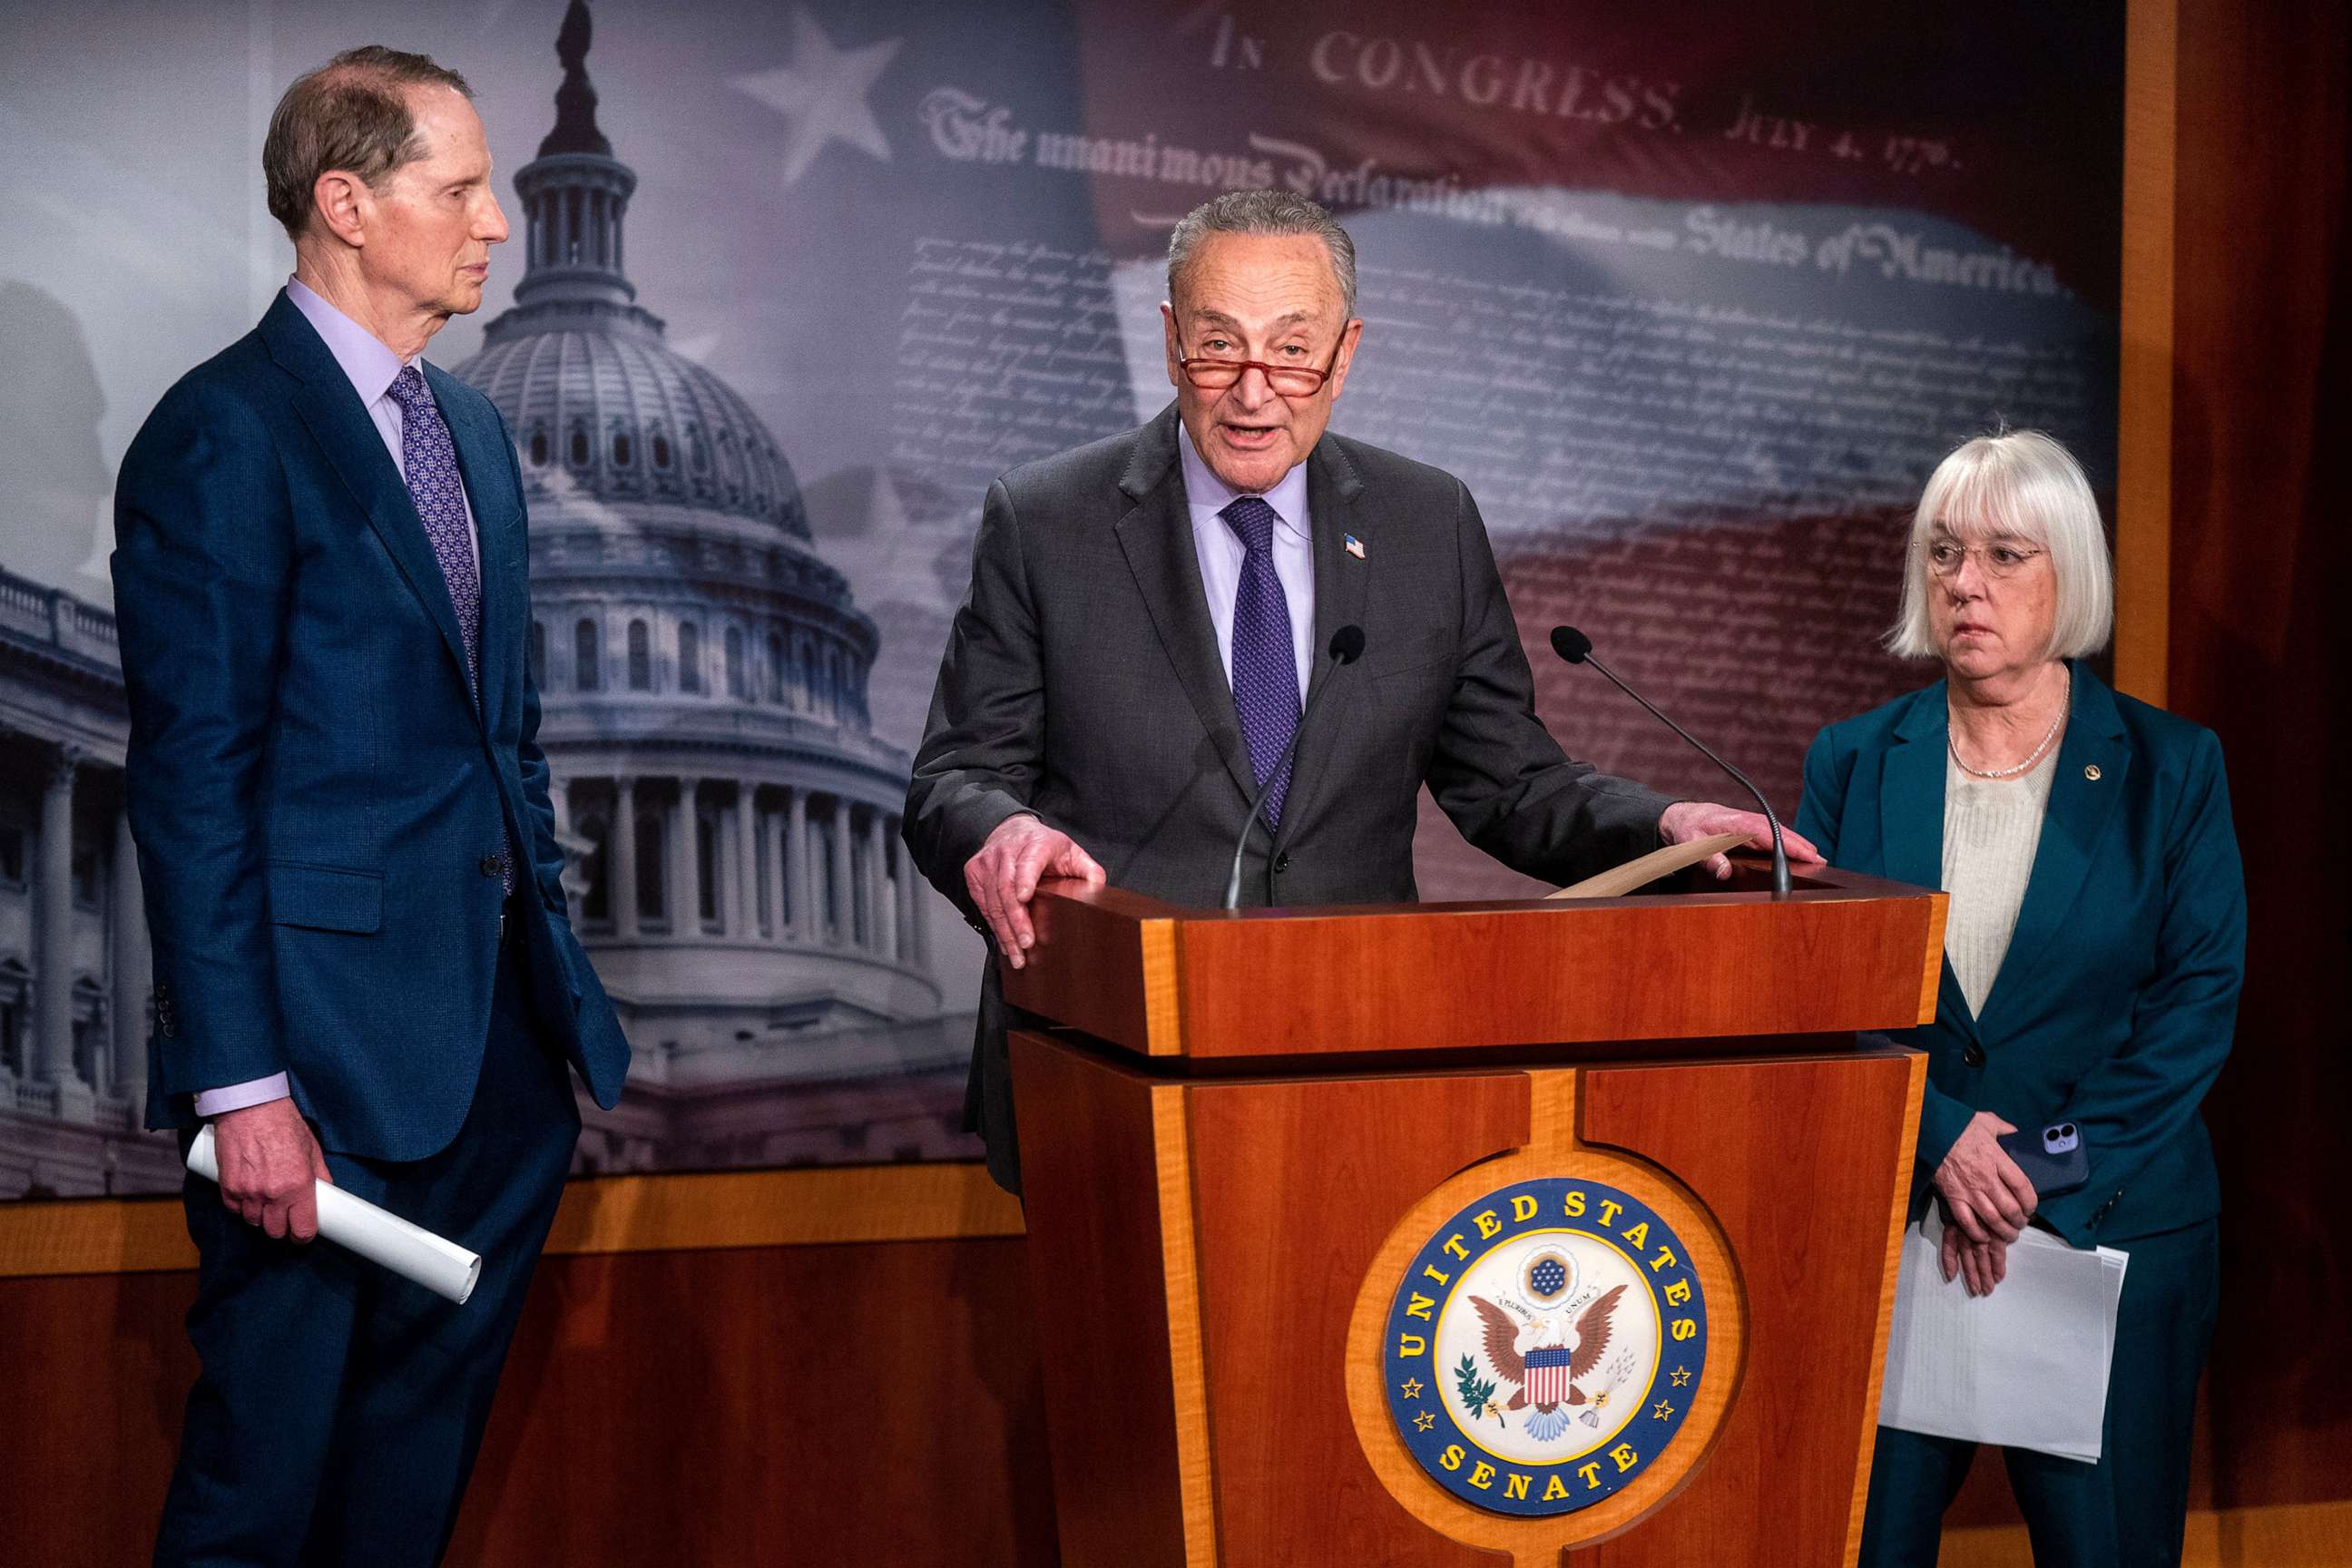 PHOTO: In this March 9, 2023, file photo, Senate Majority Leader Chuck Schumer, with Sen. Patty Murray, delivers remarks during a press conference in the US Capitol in Washington, D.C.